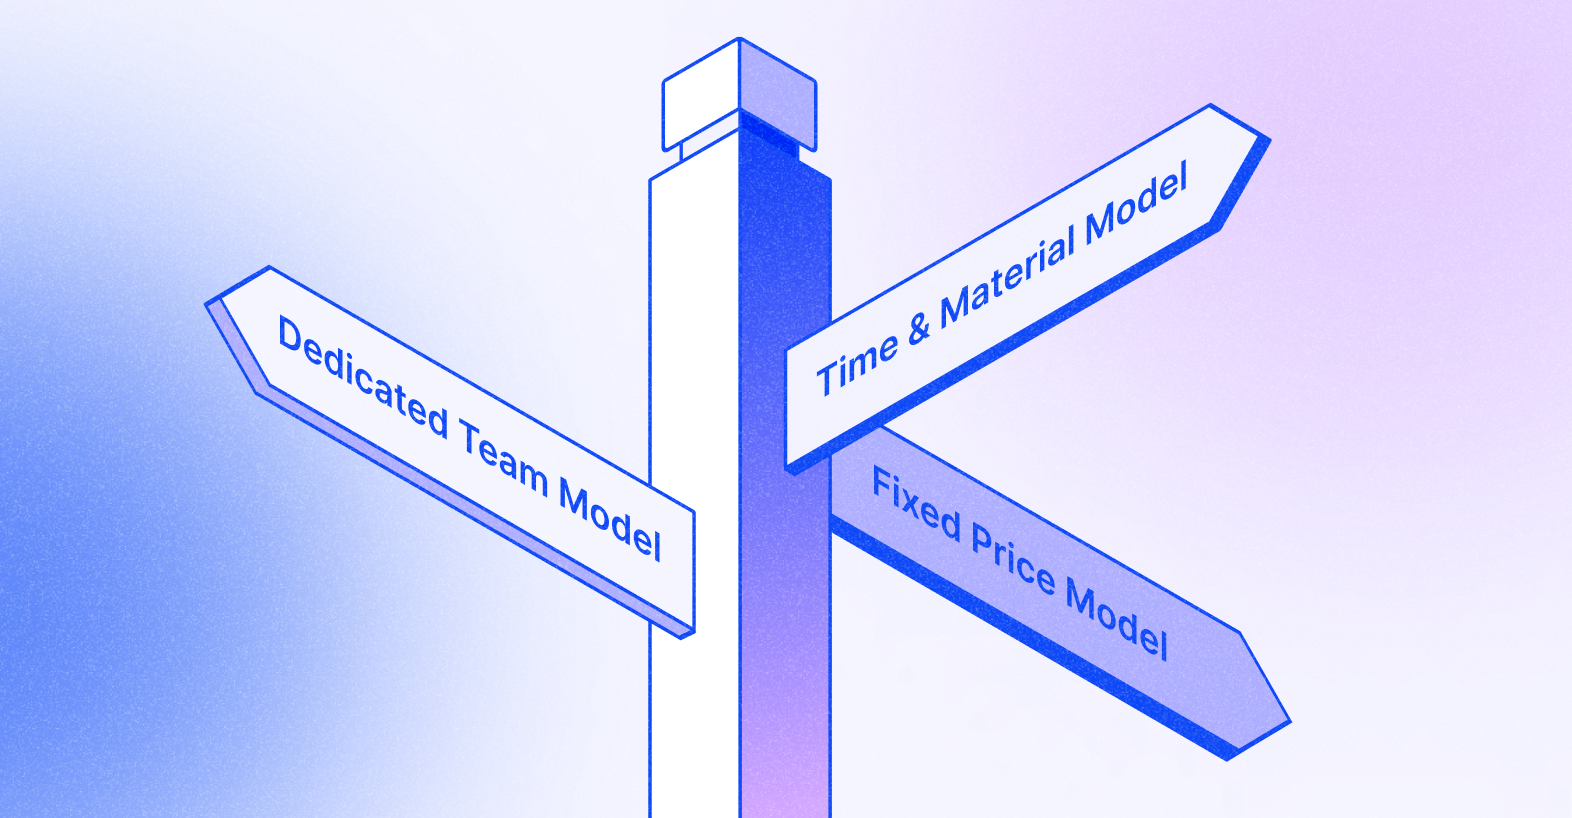 Visual representation of three diverse methods to estimate software development cost - Fixed Price Model, Time & Material Model, and Dedicated Team Model, designed to aid in budgeting and strategic planning